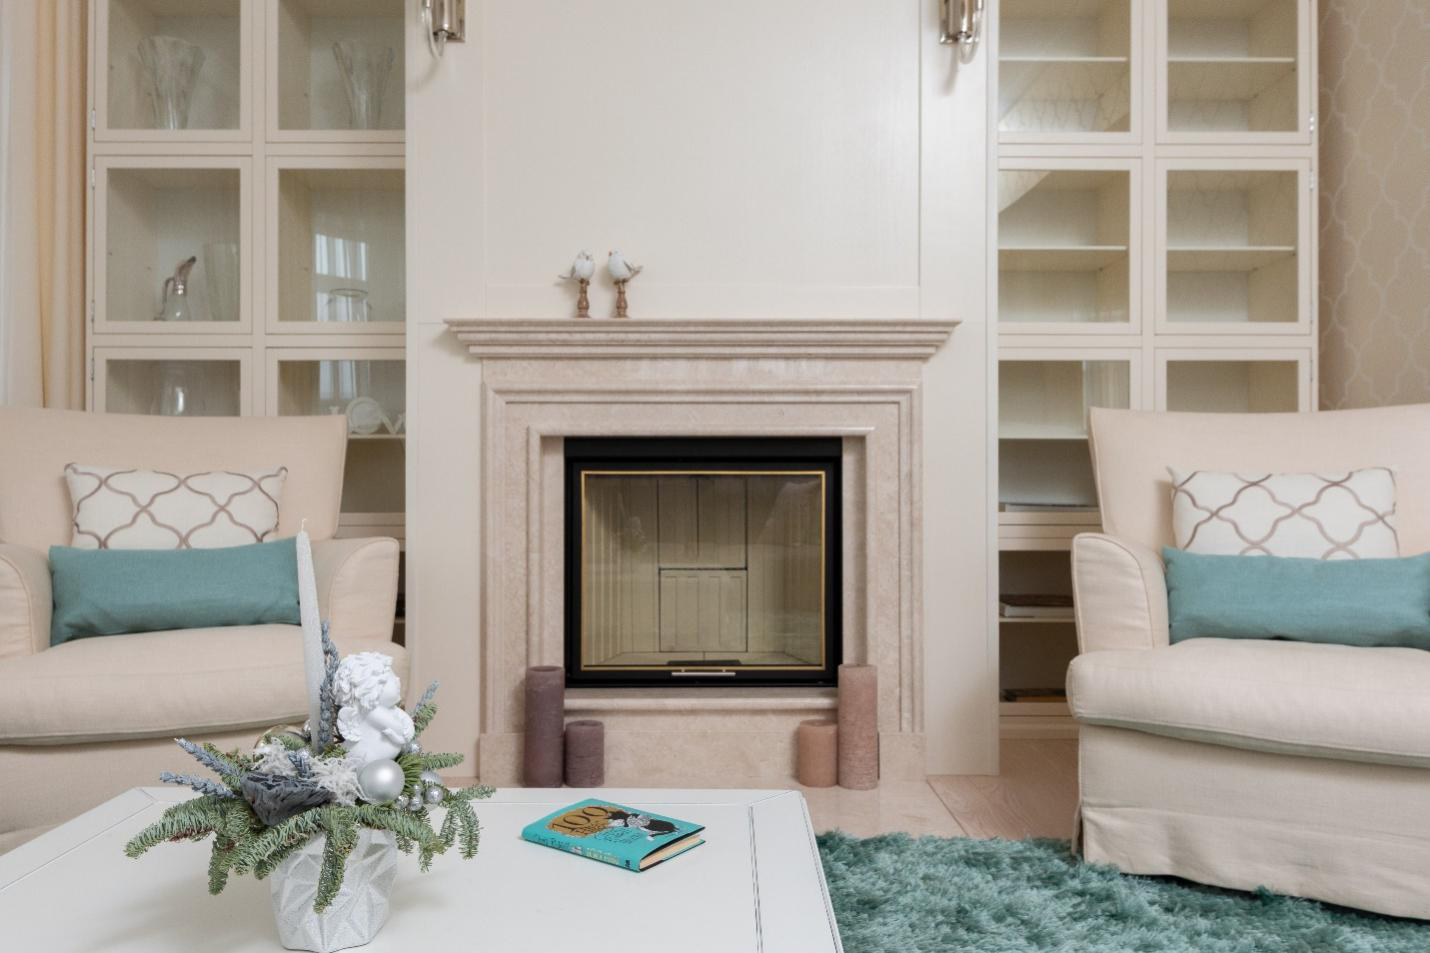 A fireplace is the focal point of a living room, flocked by two armchairs